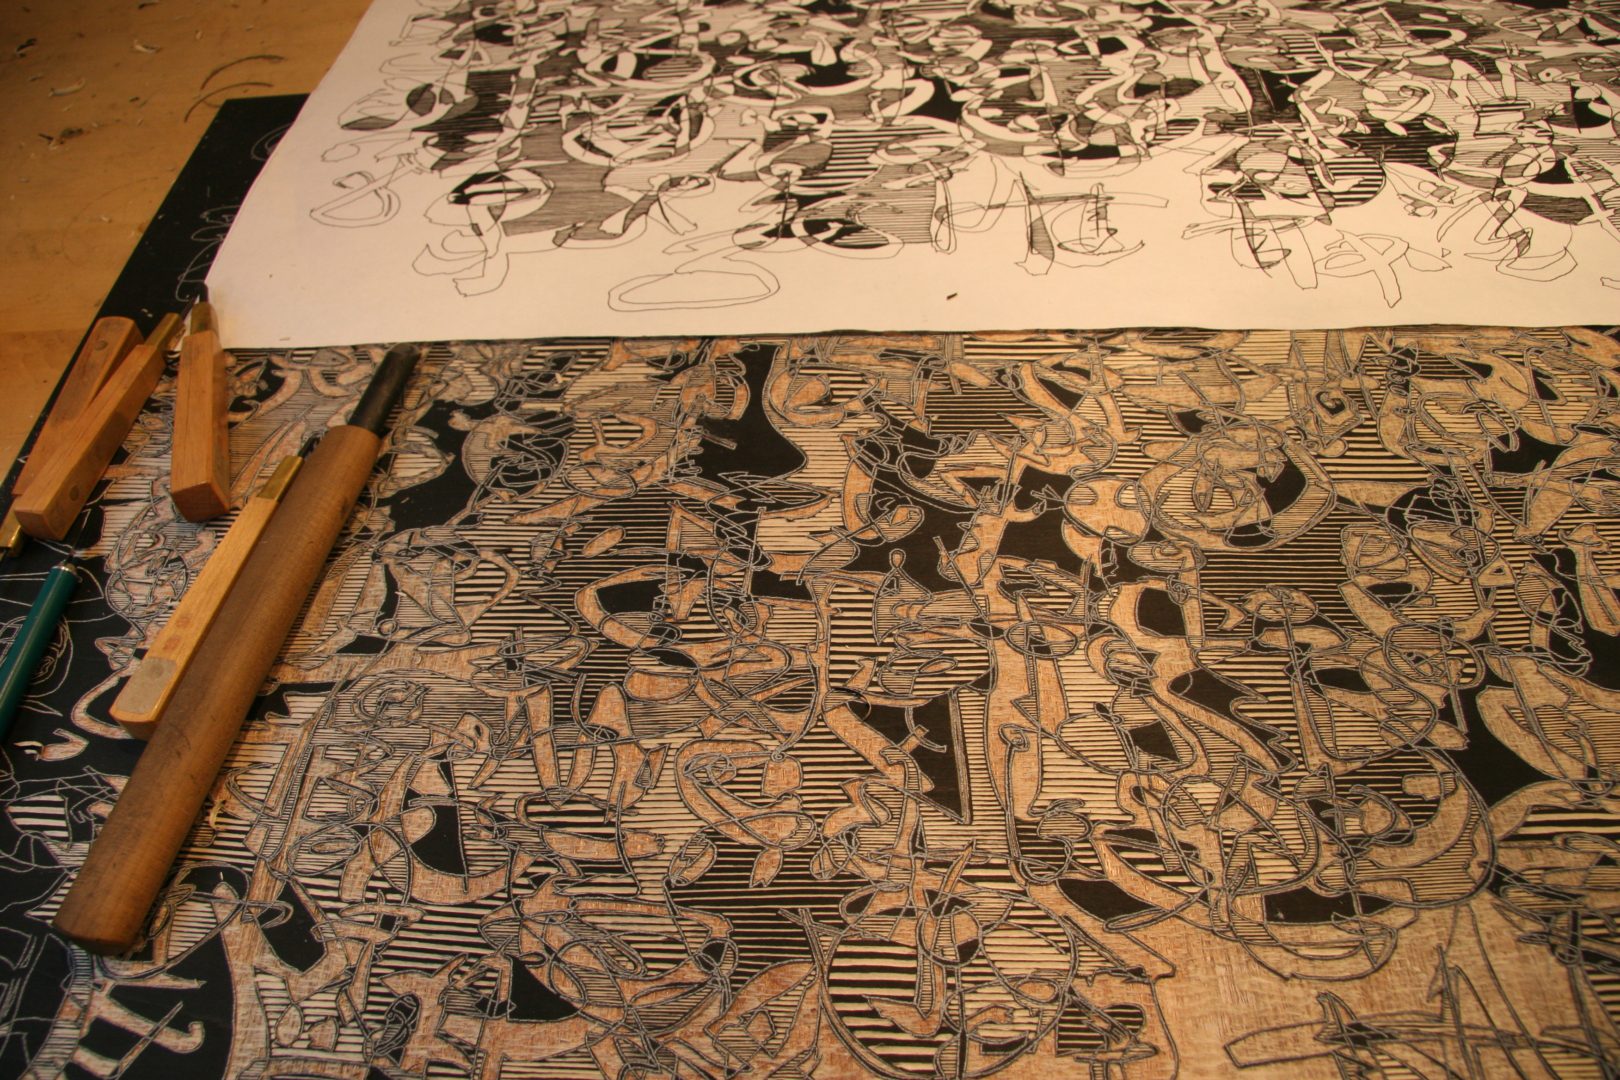 A close up of two papers with drawings on them